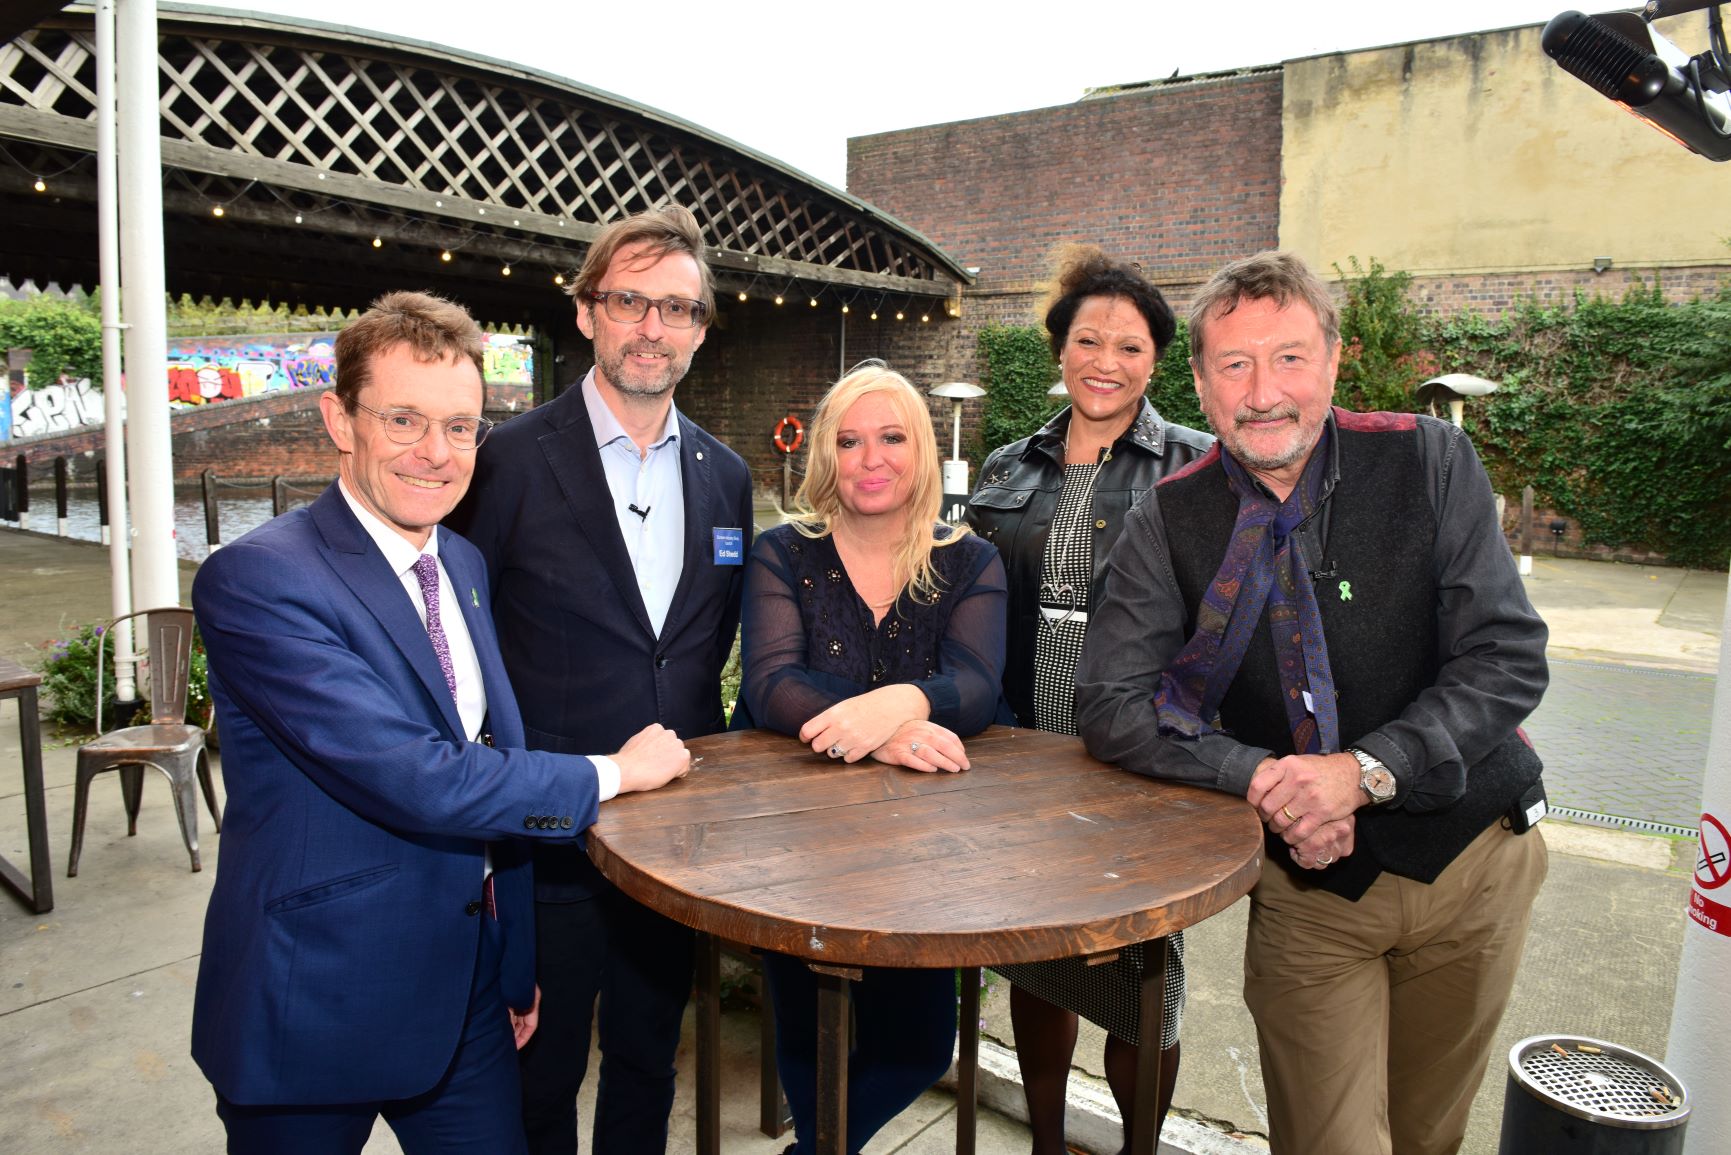 (l-r) Mayor of the West Midlands Andy Street with Ed Shedd, Debbie Isitt, WMCA chief executive Deborah Cadman and Steven Knight at the launch of Create Central which will be working closely with the BBC